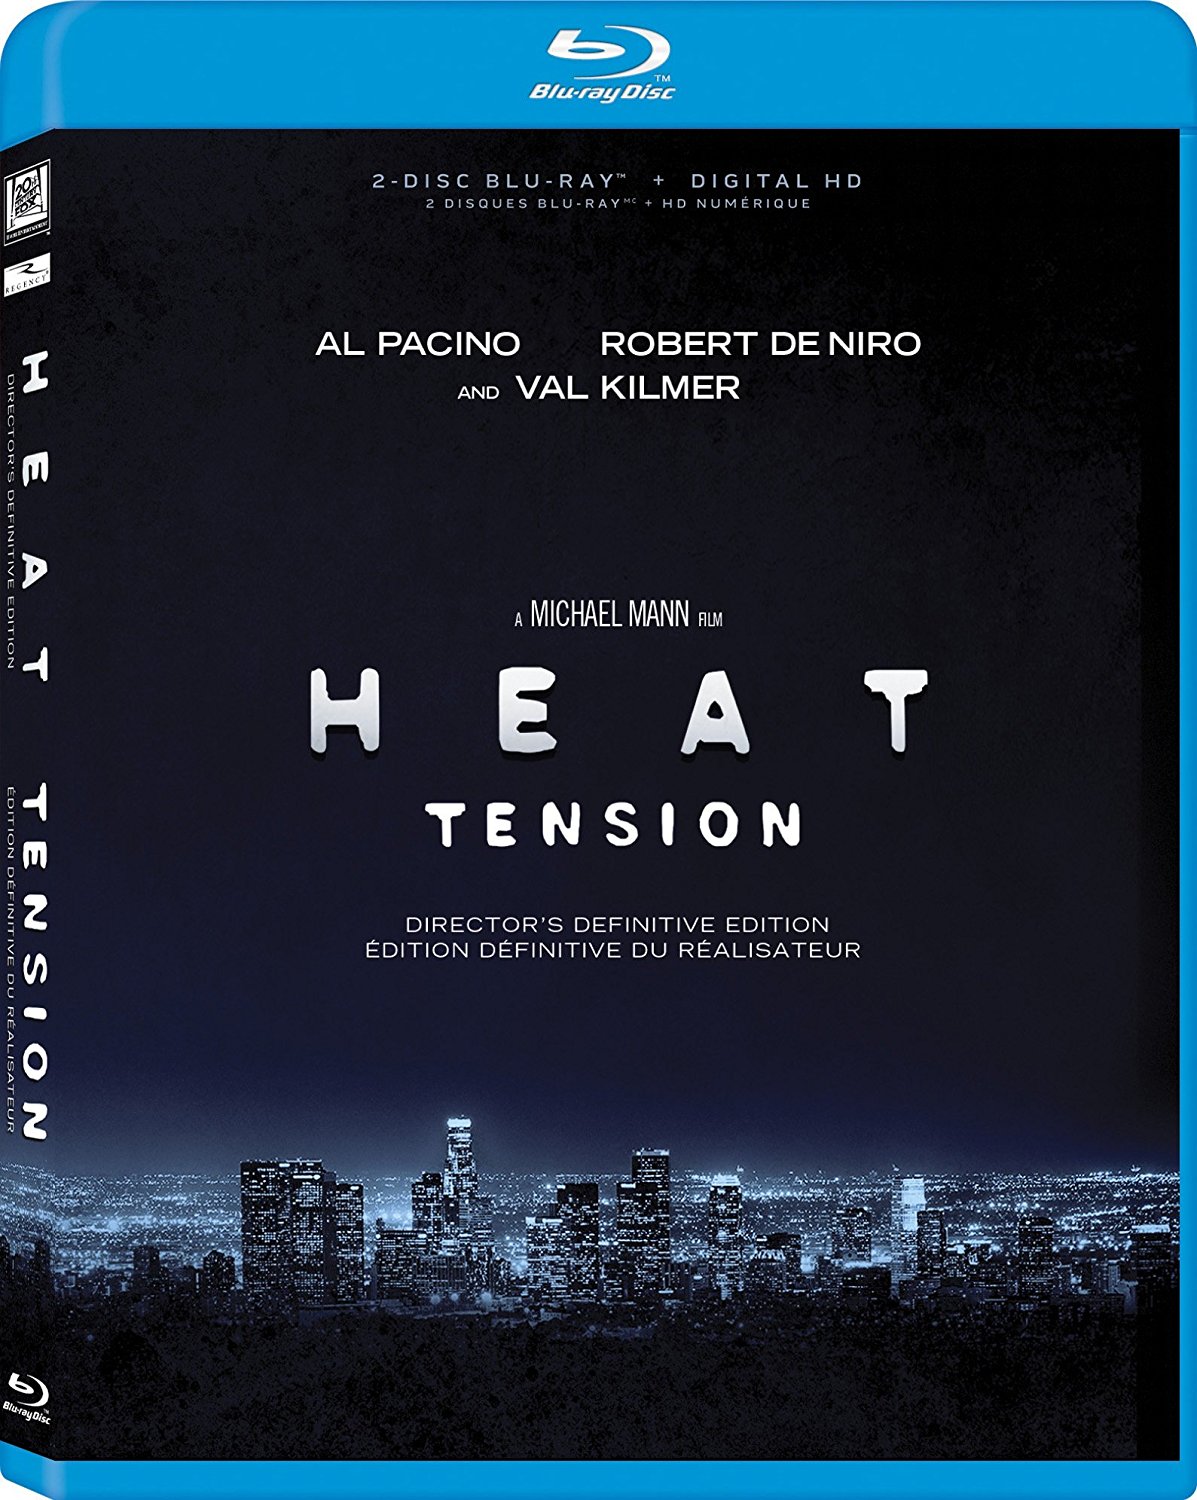 Michael Mann’s ‘Heat’ Gets Remastered in 4k for Director’s Definitive Cut ...1197 x 1500